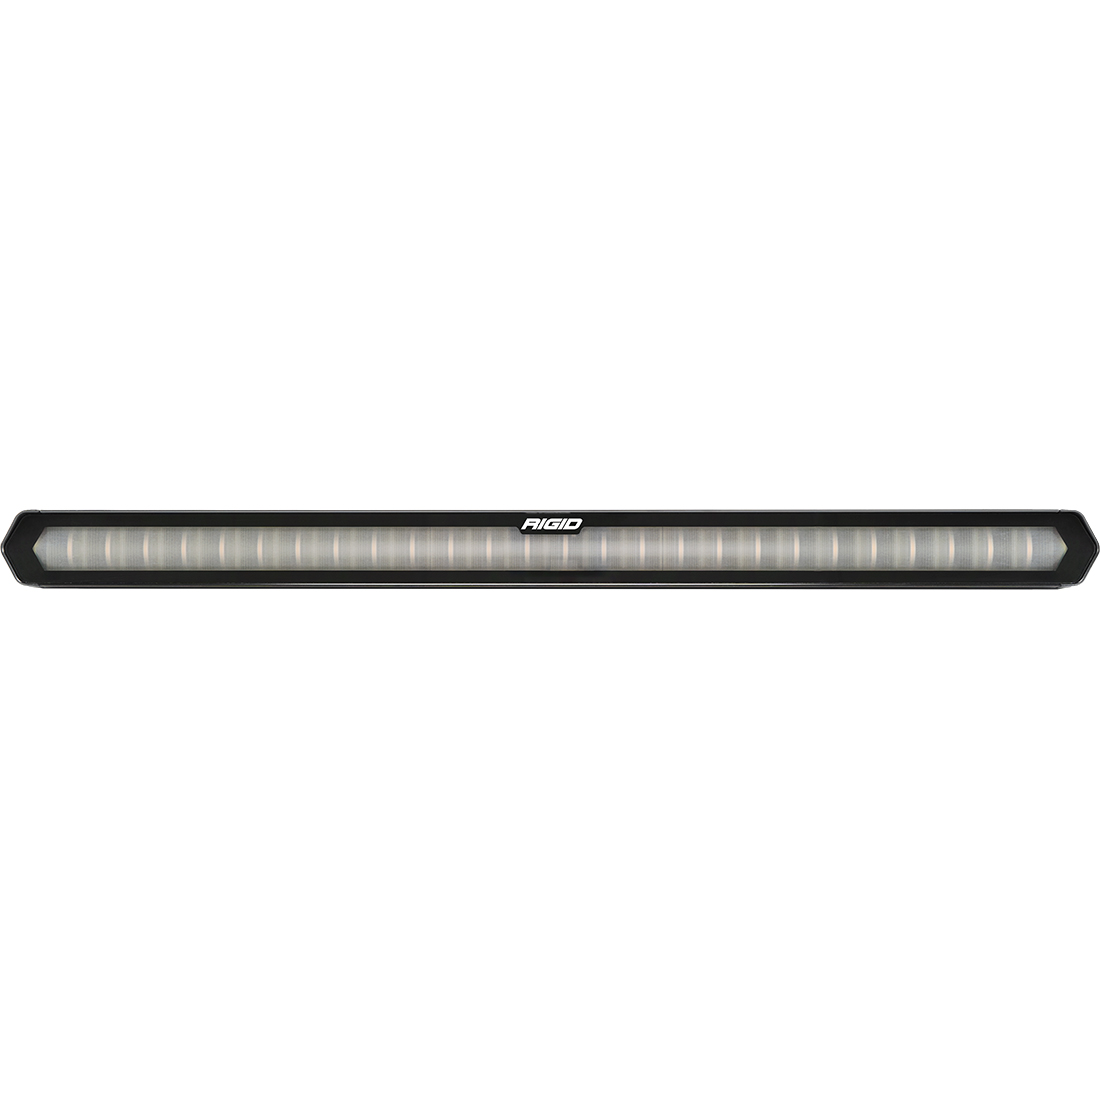 RIGID 28 inch Rear Facing LED Chase Bar with 5 Colors & Surface Mount